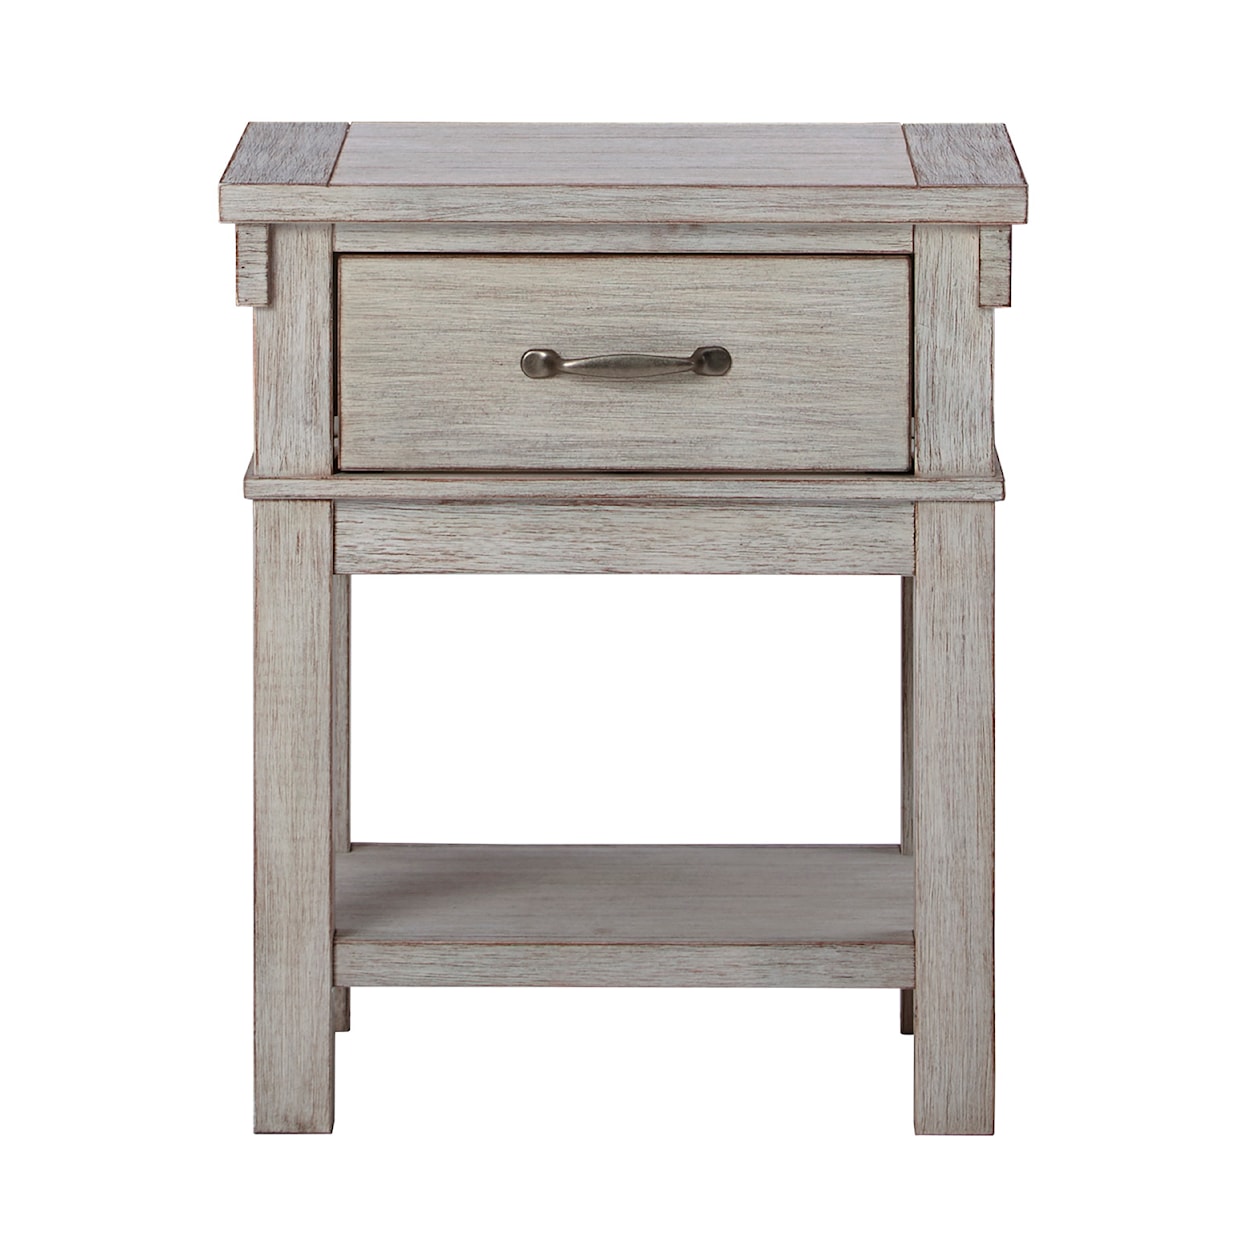 Signature Design by Ashley Hollentown Nightstand